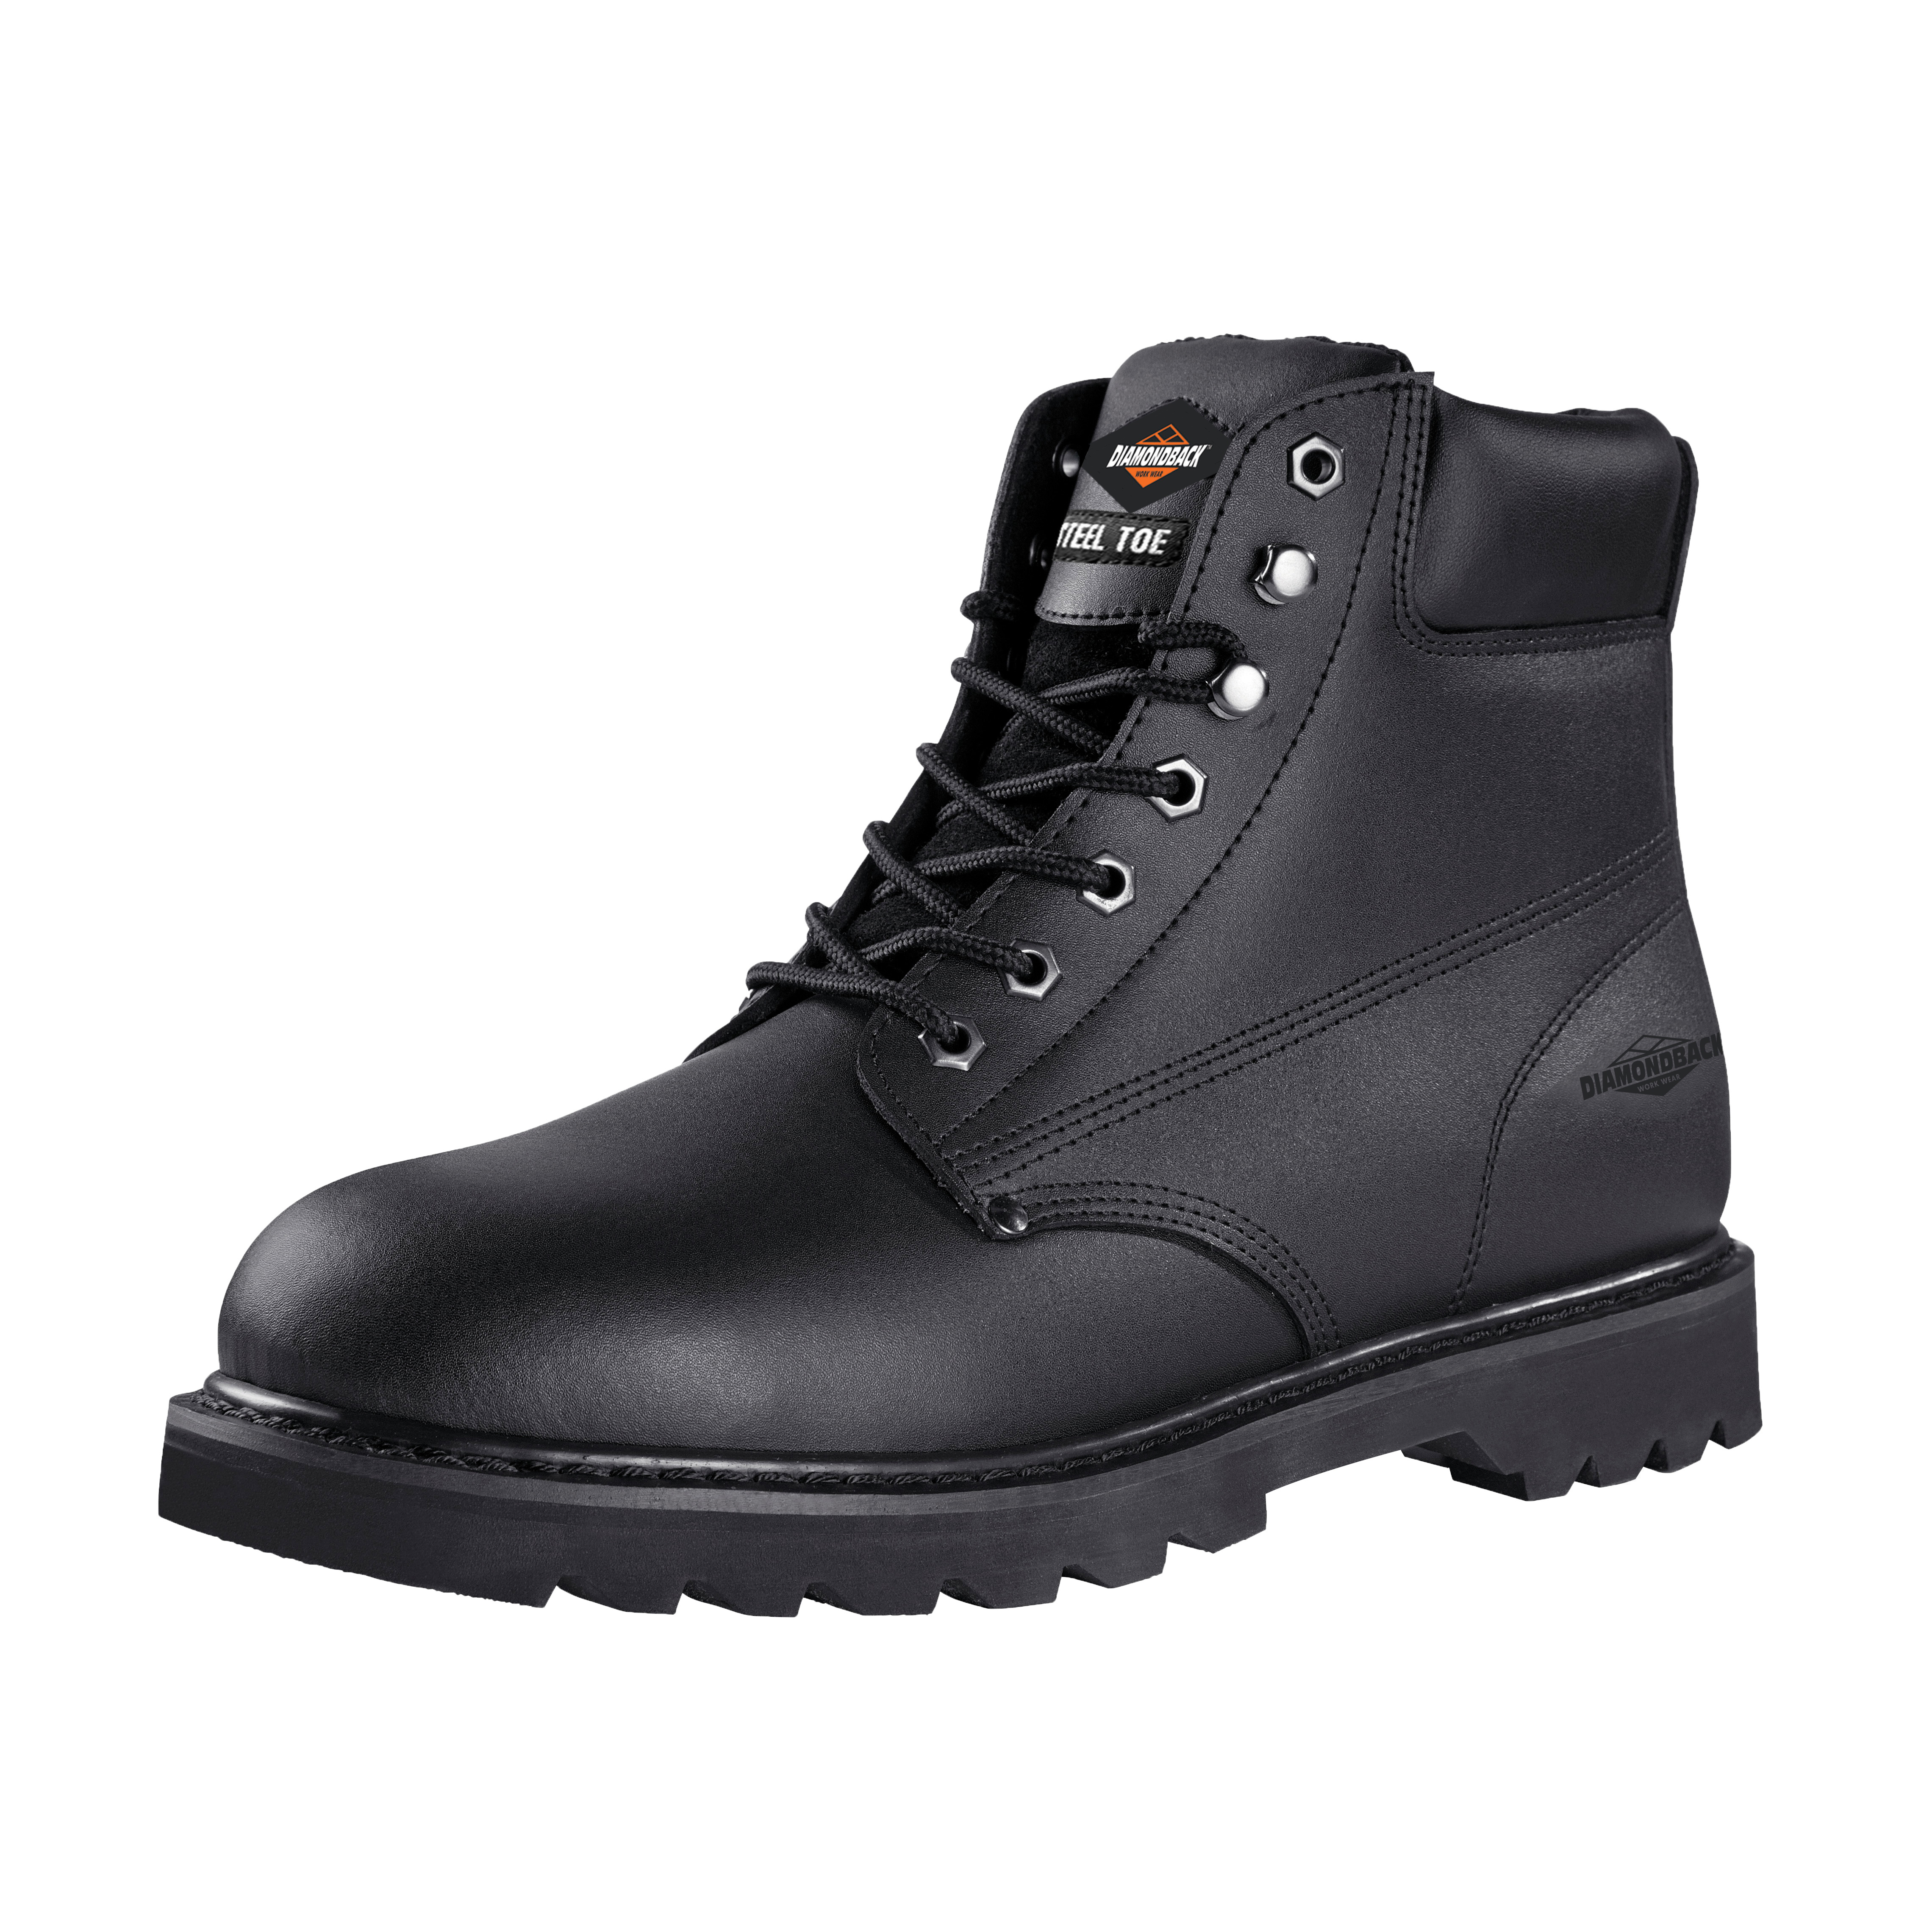 Work Boots, 7.5, Medium W, Black, Leather Upper, Lace-Up, Steel Toe, With Lining